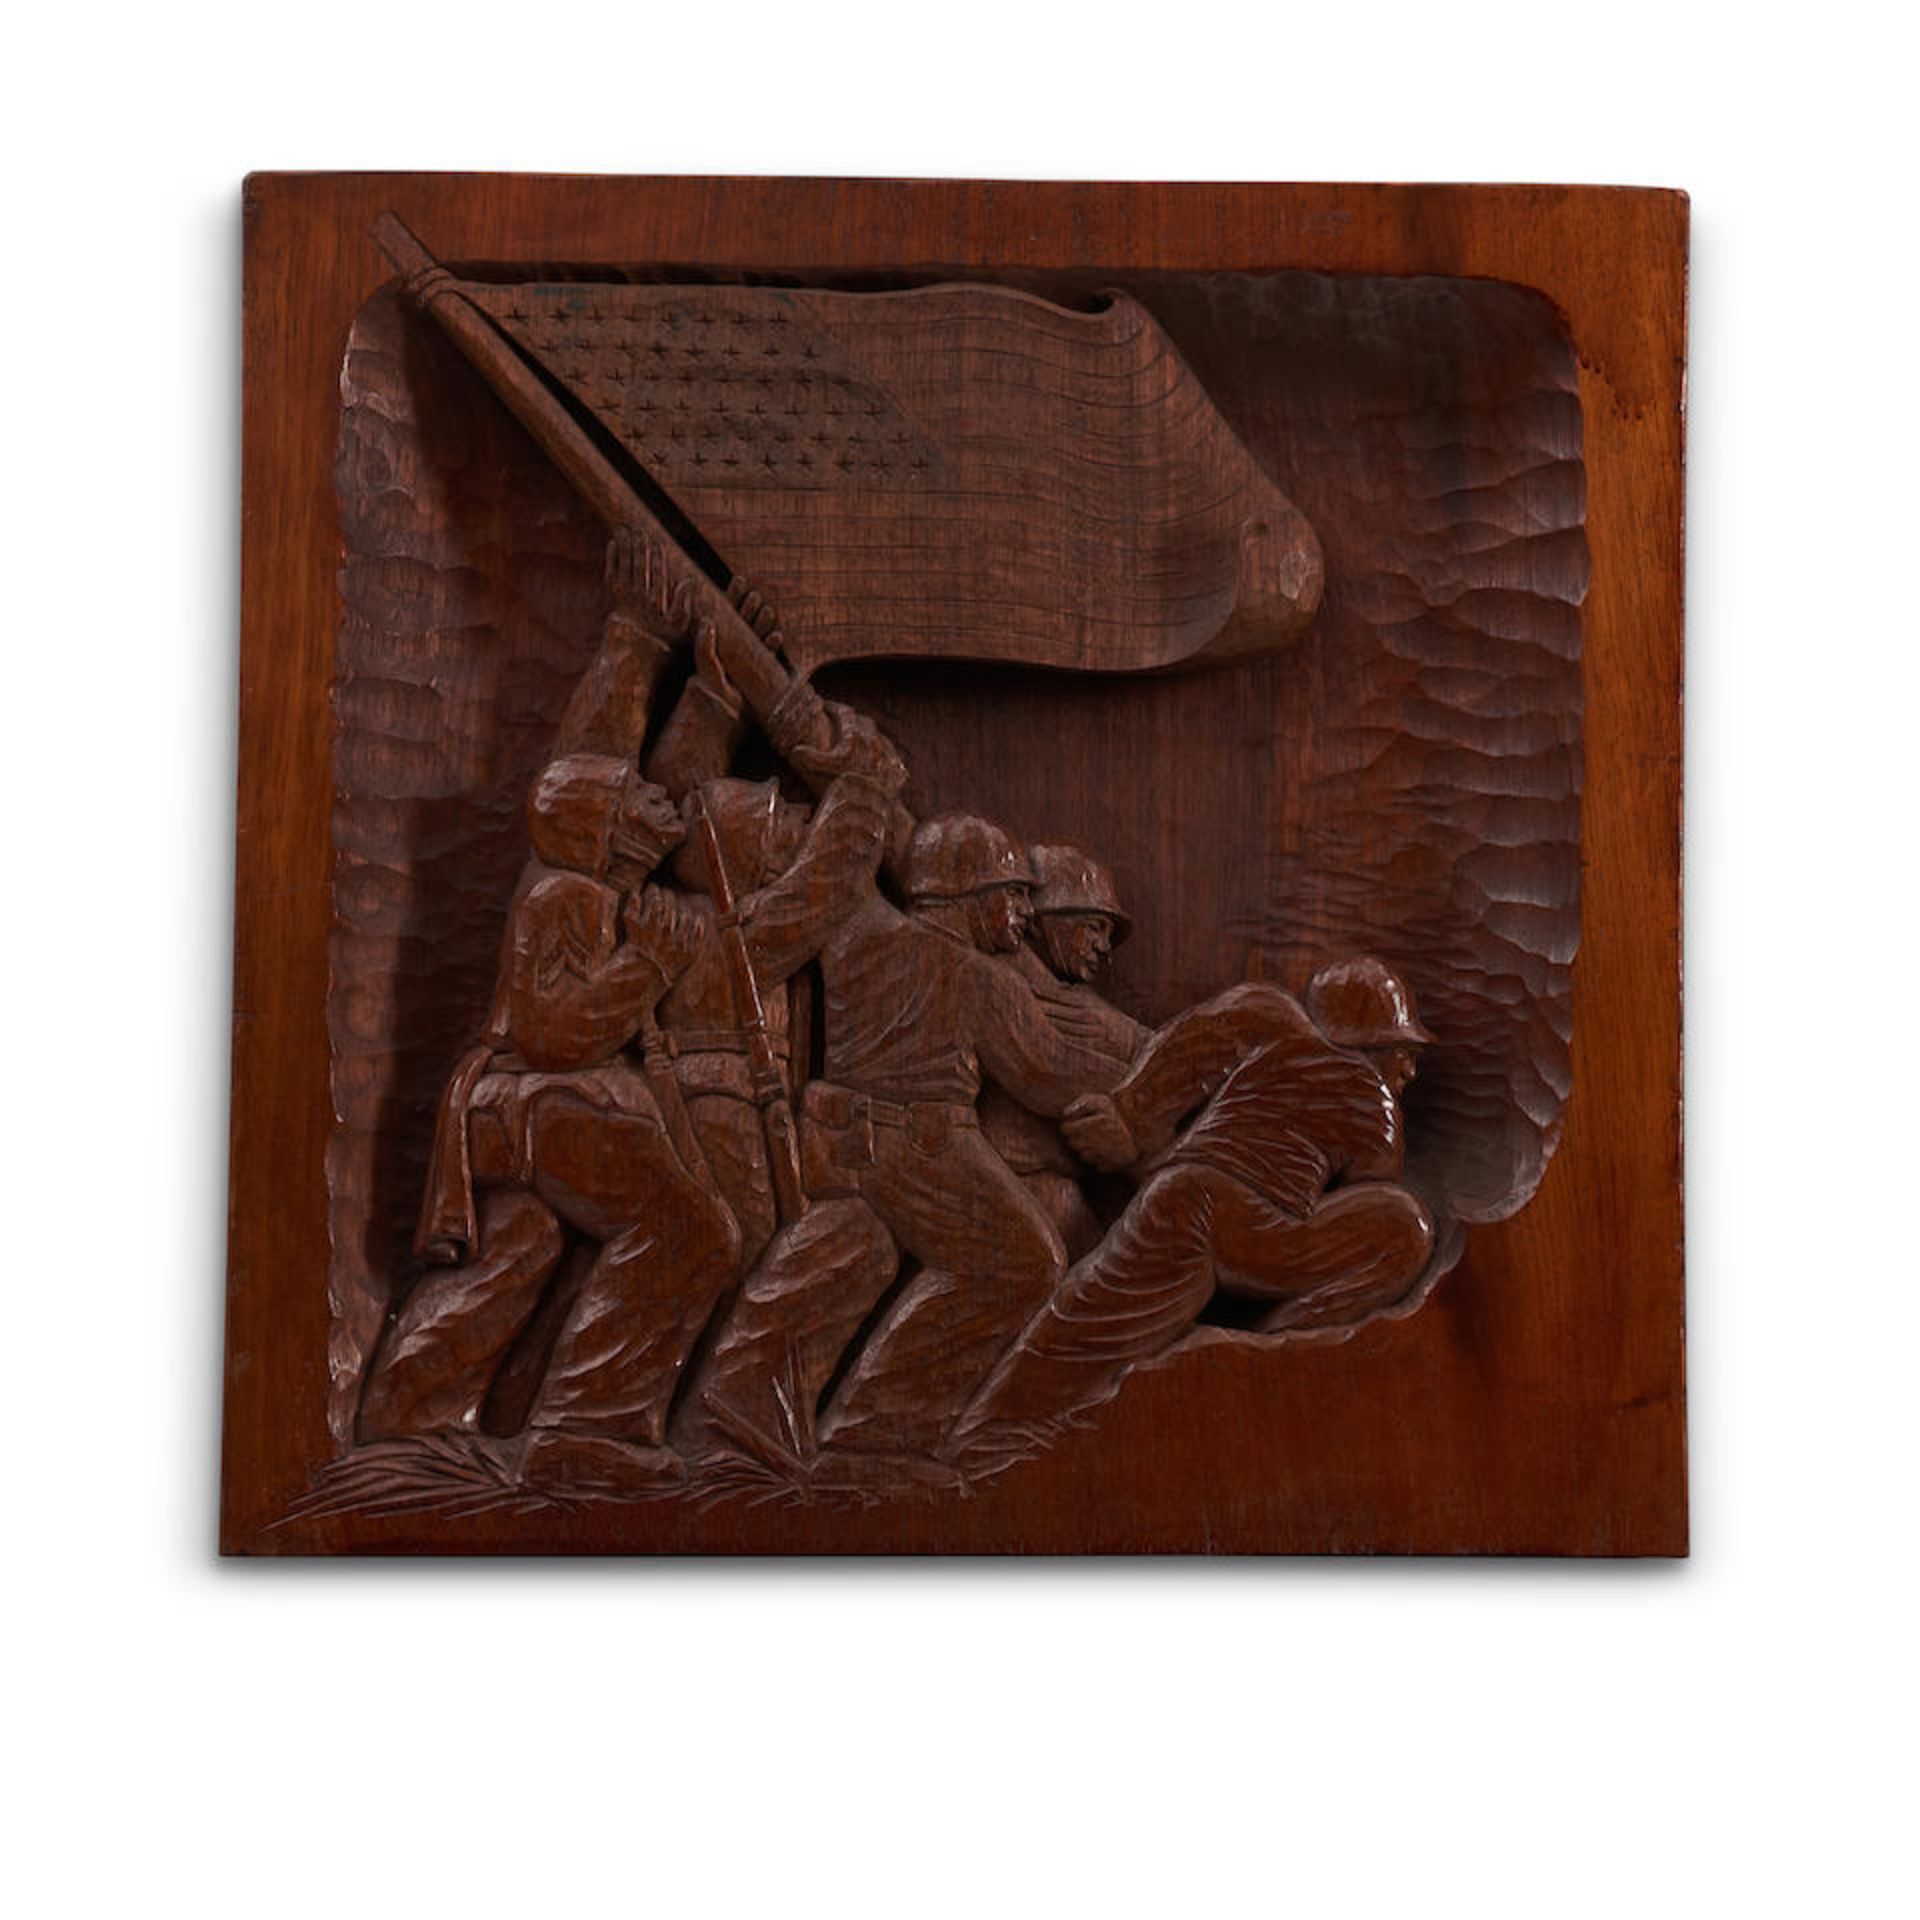 Relief Carving of Iwo Jima, signed A. Bernhauser, United States, 1945.